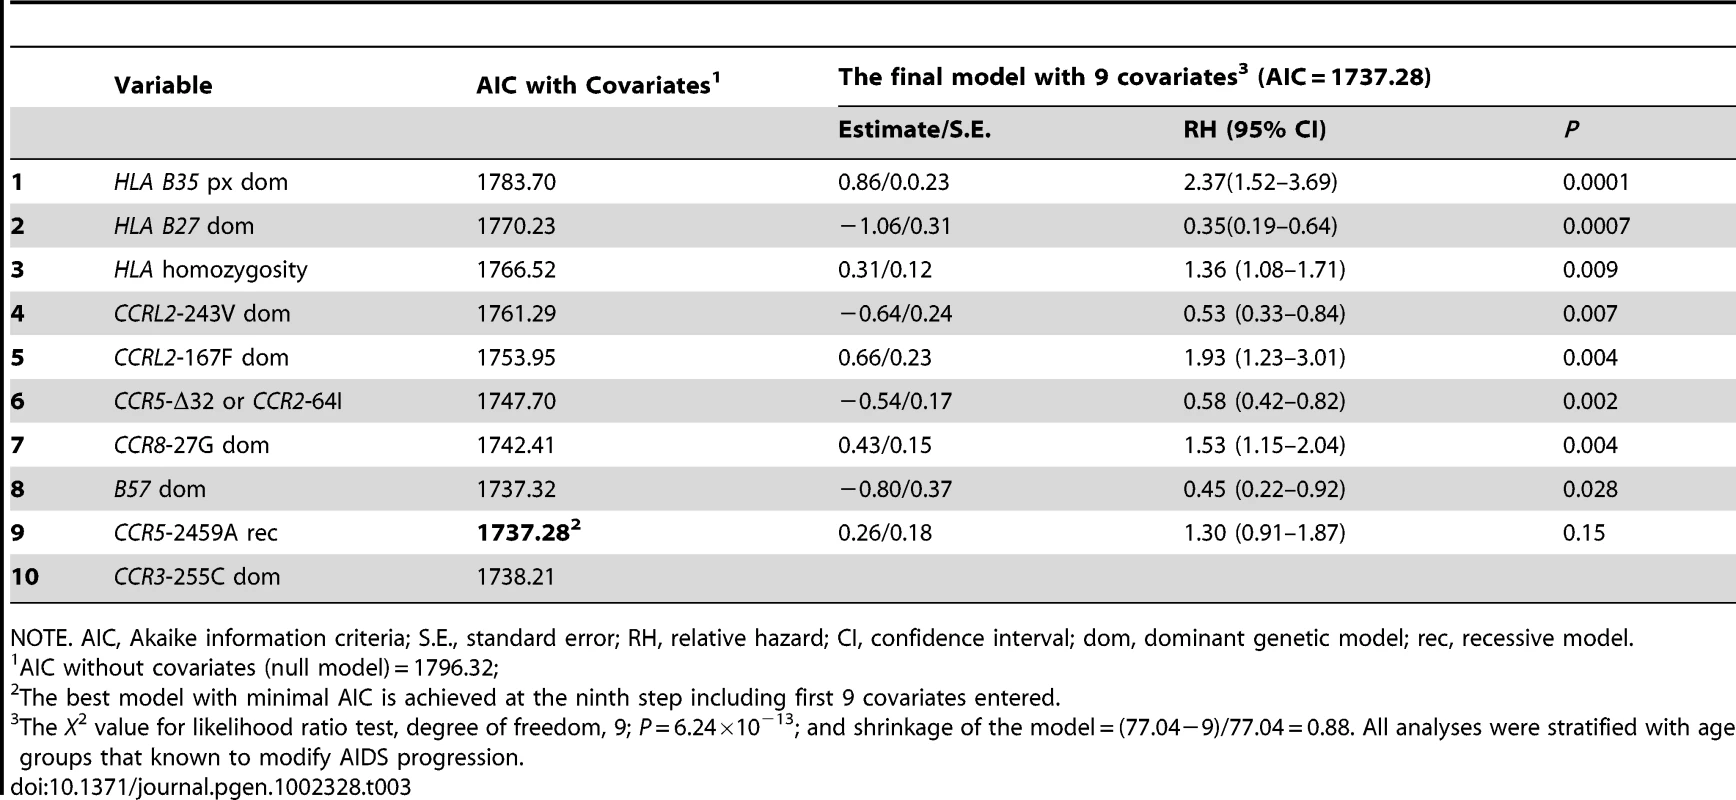 Sequential stepwise regression for Cox PH model selection and maximum likelihood estimates of genetic covariates associated with AIDS progression.